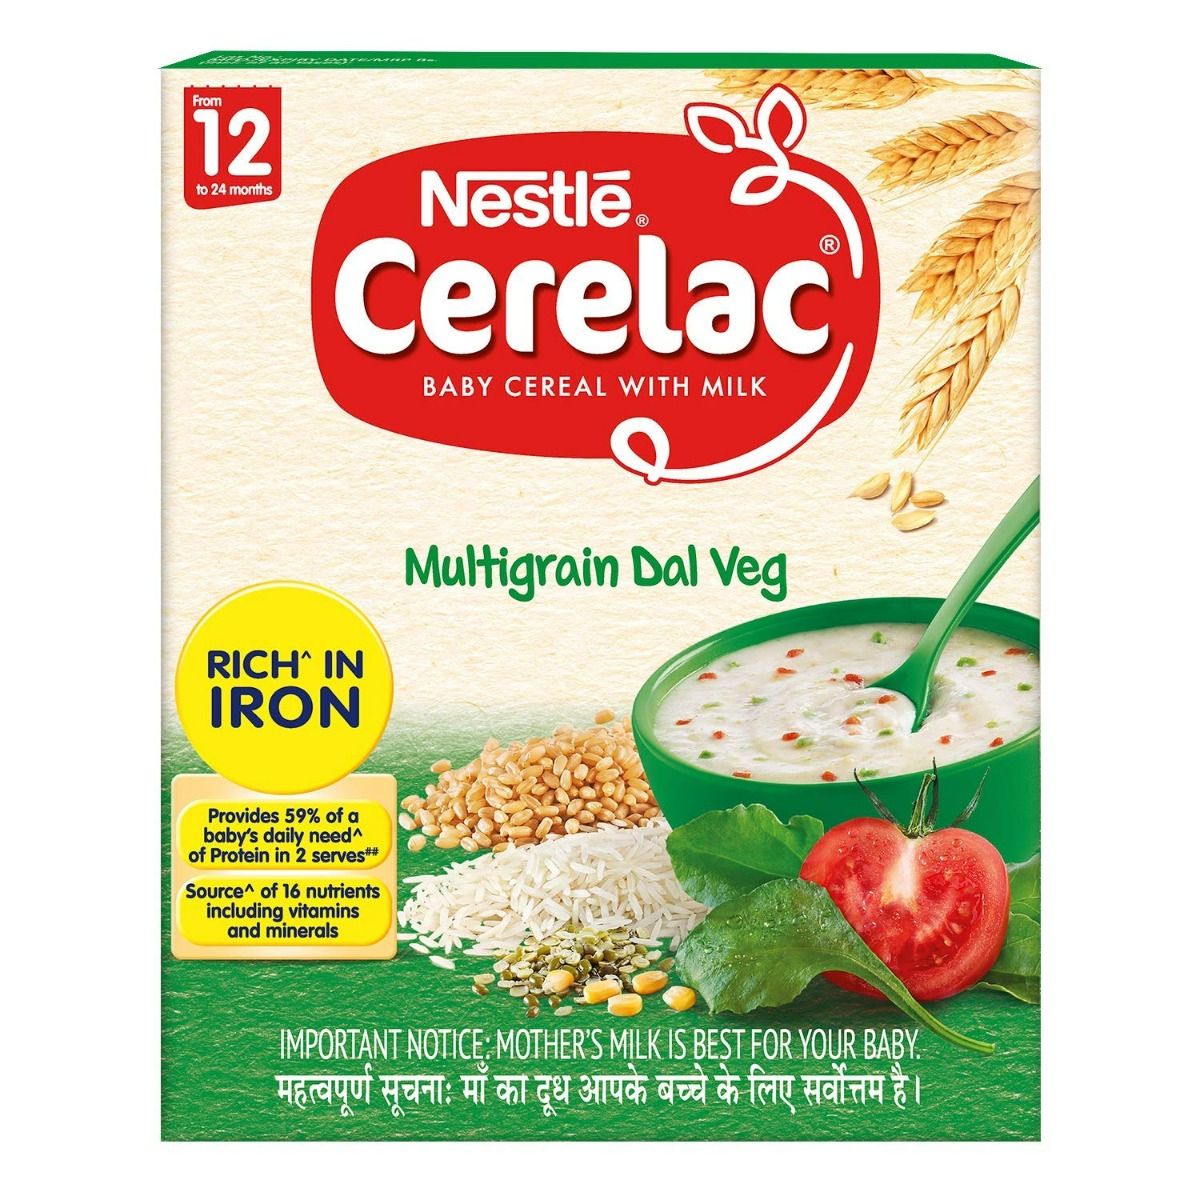 Buy Nestle Cerelac Baby Cereal with Milk Wheat Multigrain Dal Veg (From 12 to 24 Months) Powder, 300 gm Refill Pack Online